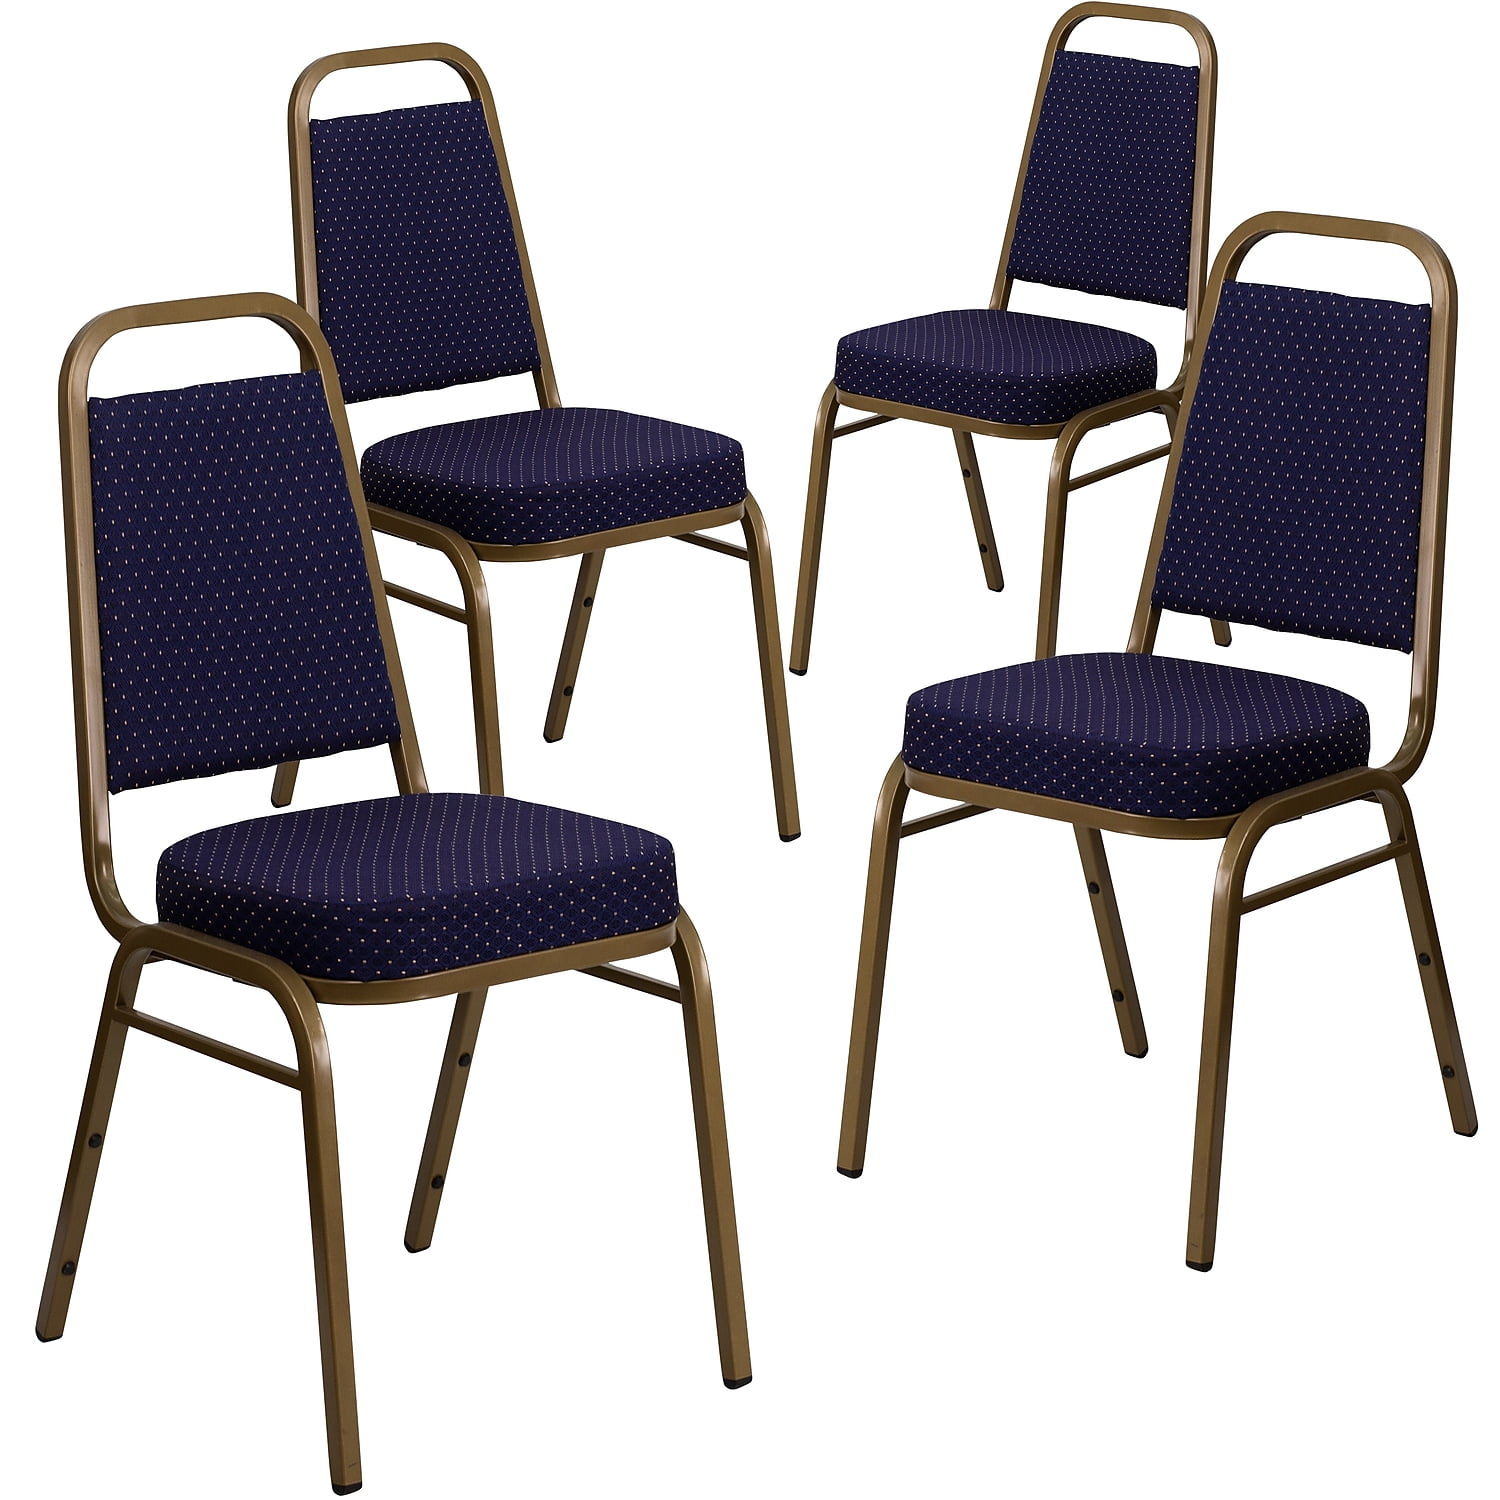 Flash Furniture 4 Pack HERCULES Series Trapezoidal Back Stacking Banquet  Chair in Navy Patterned Fabric - Gold Frame